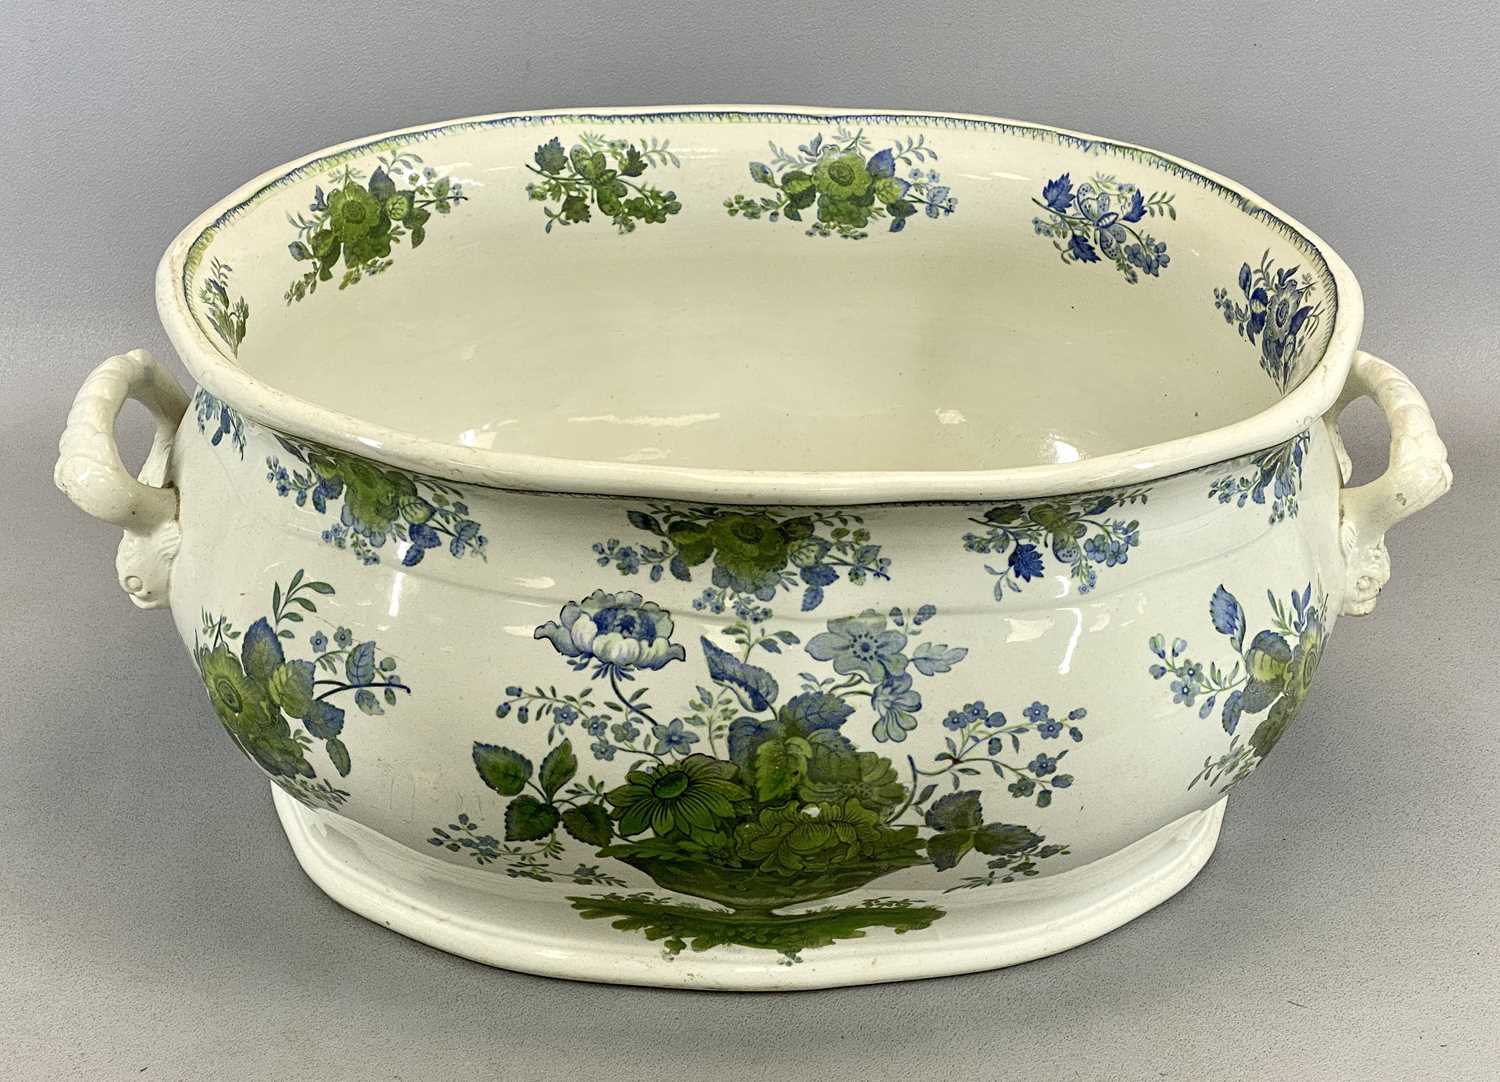 POTTERY TWO HANDLED FOOTBATH, late 19th Century, decorated in blues and greens with floral baskets - Image 2 of 4